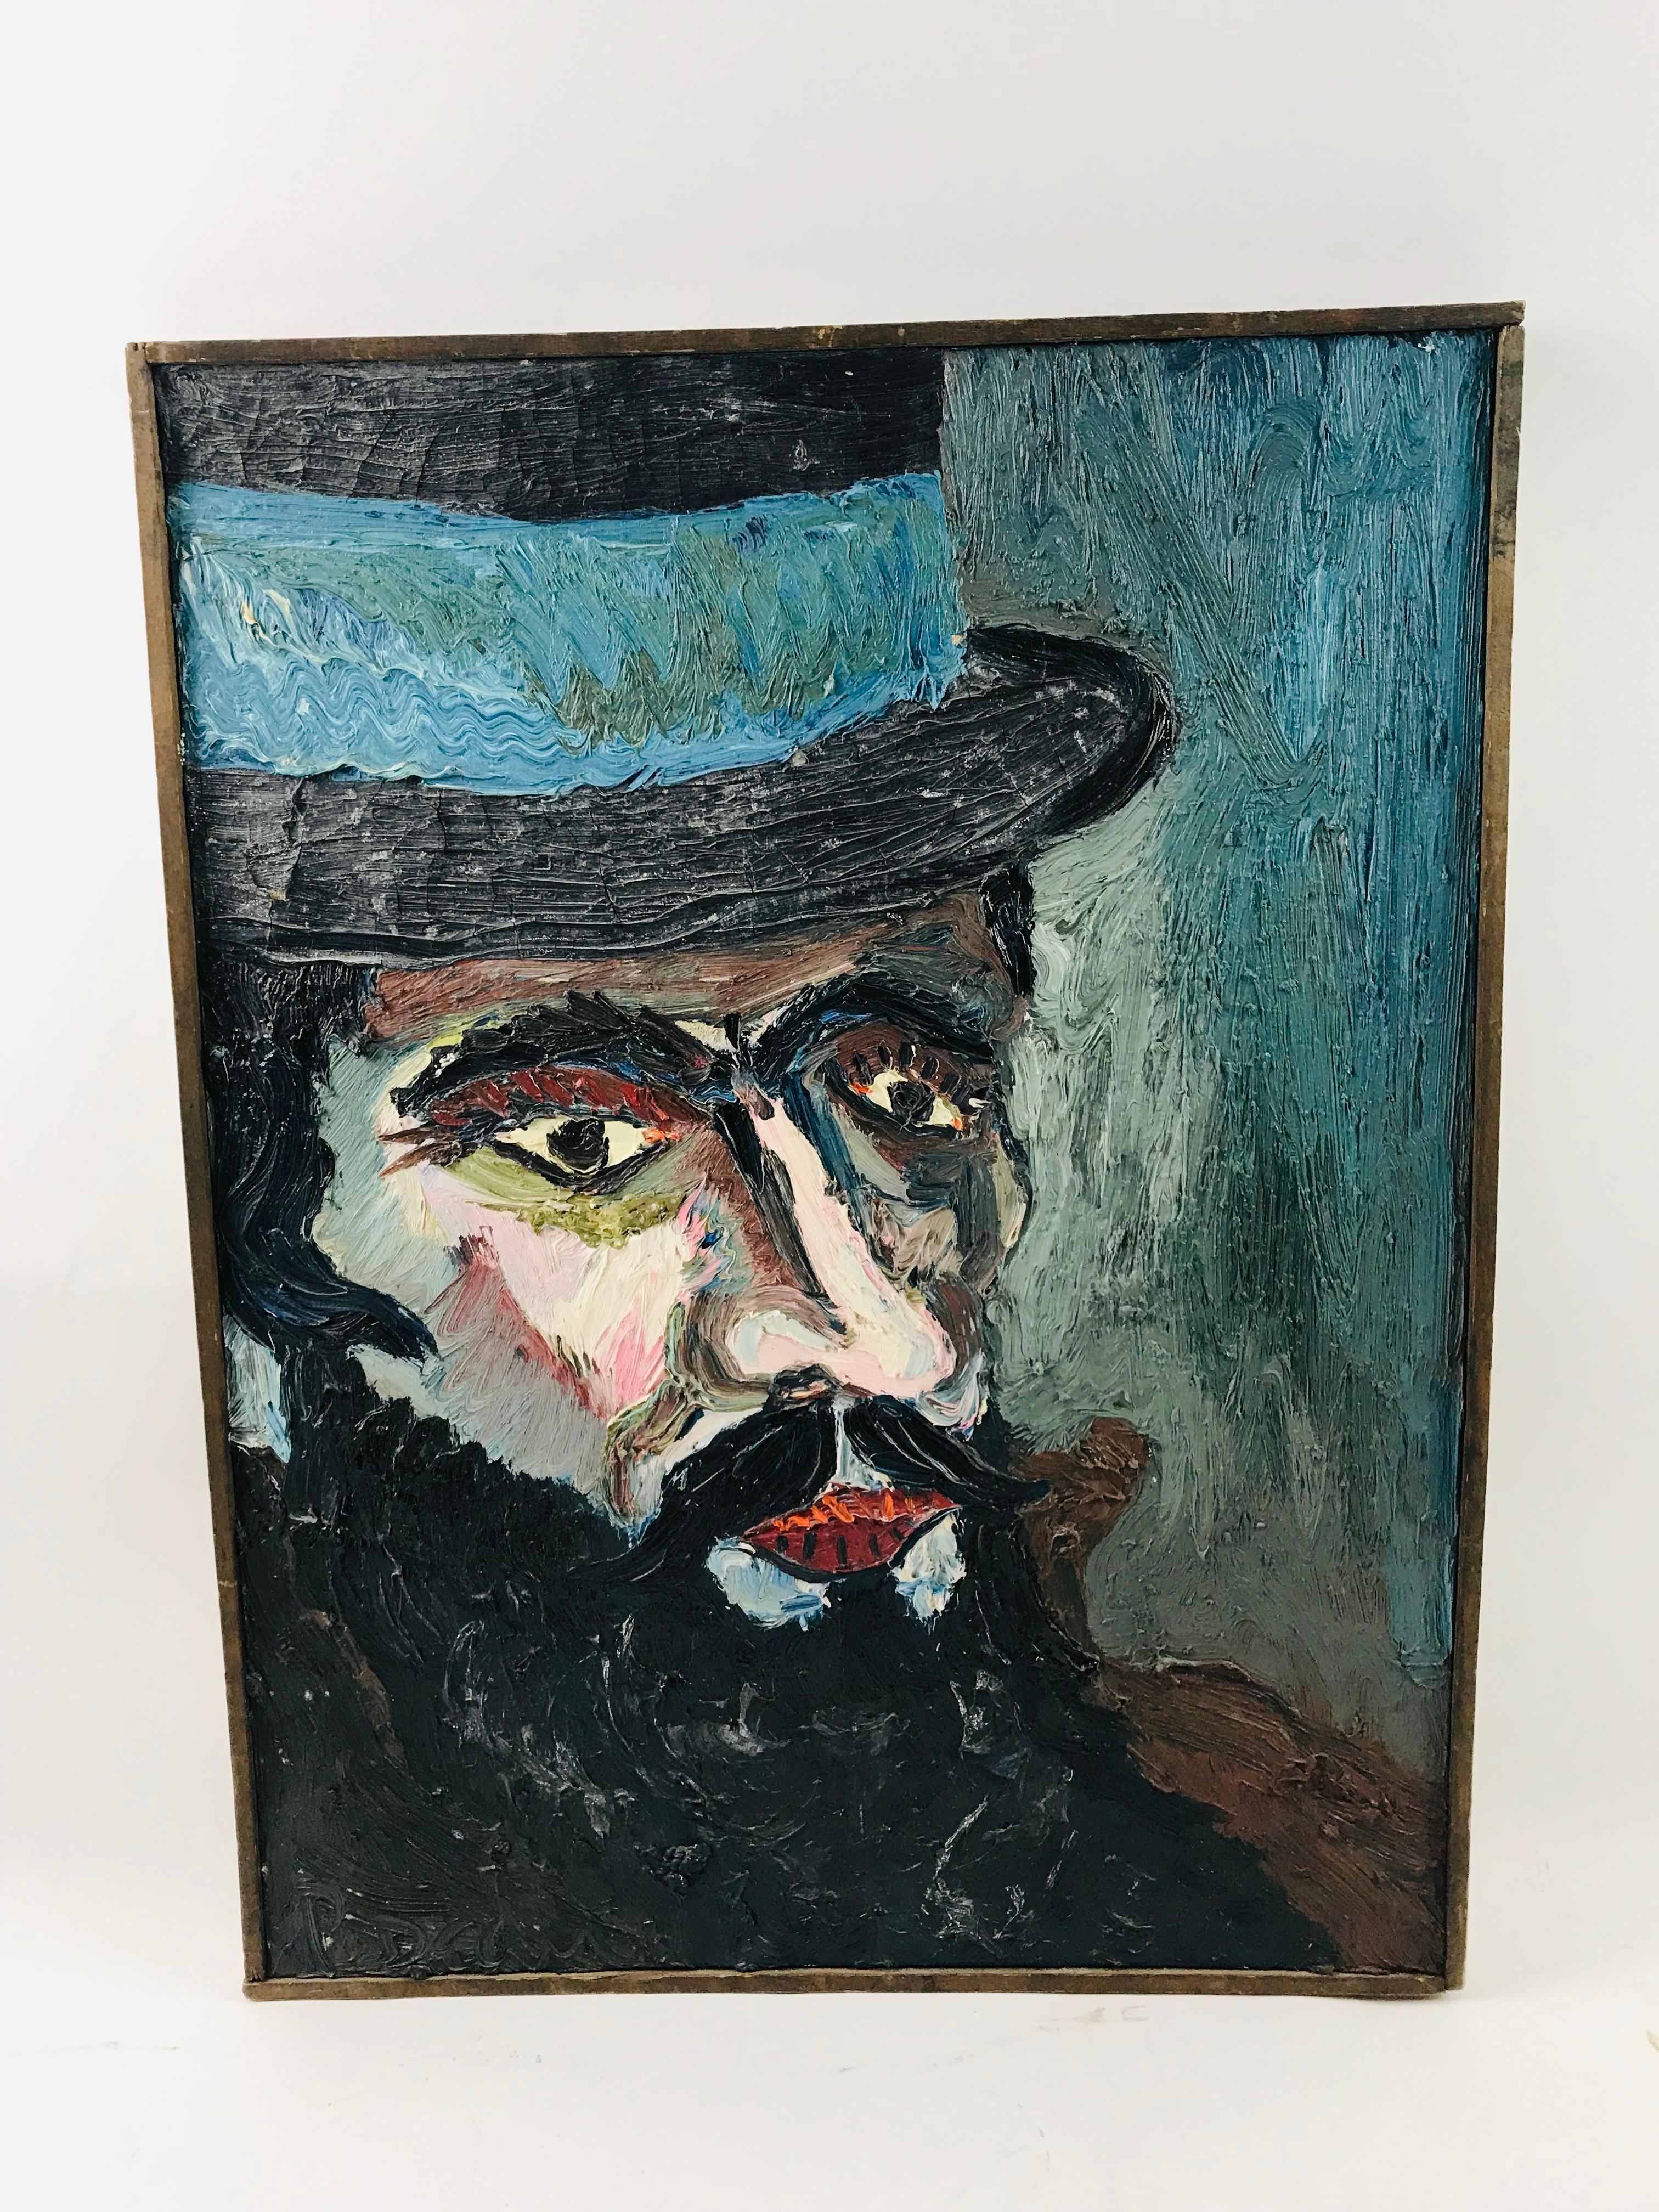 Striking portrait of a man is a hat by listed artist Peter Dean (1934-1993). Painted on canvas with heavy impasto and strong colors. Condition is very good.

Condition: Good condition, minimal wear to frame.

Dimensions:
Height - 25